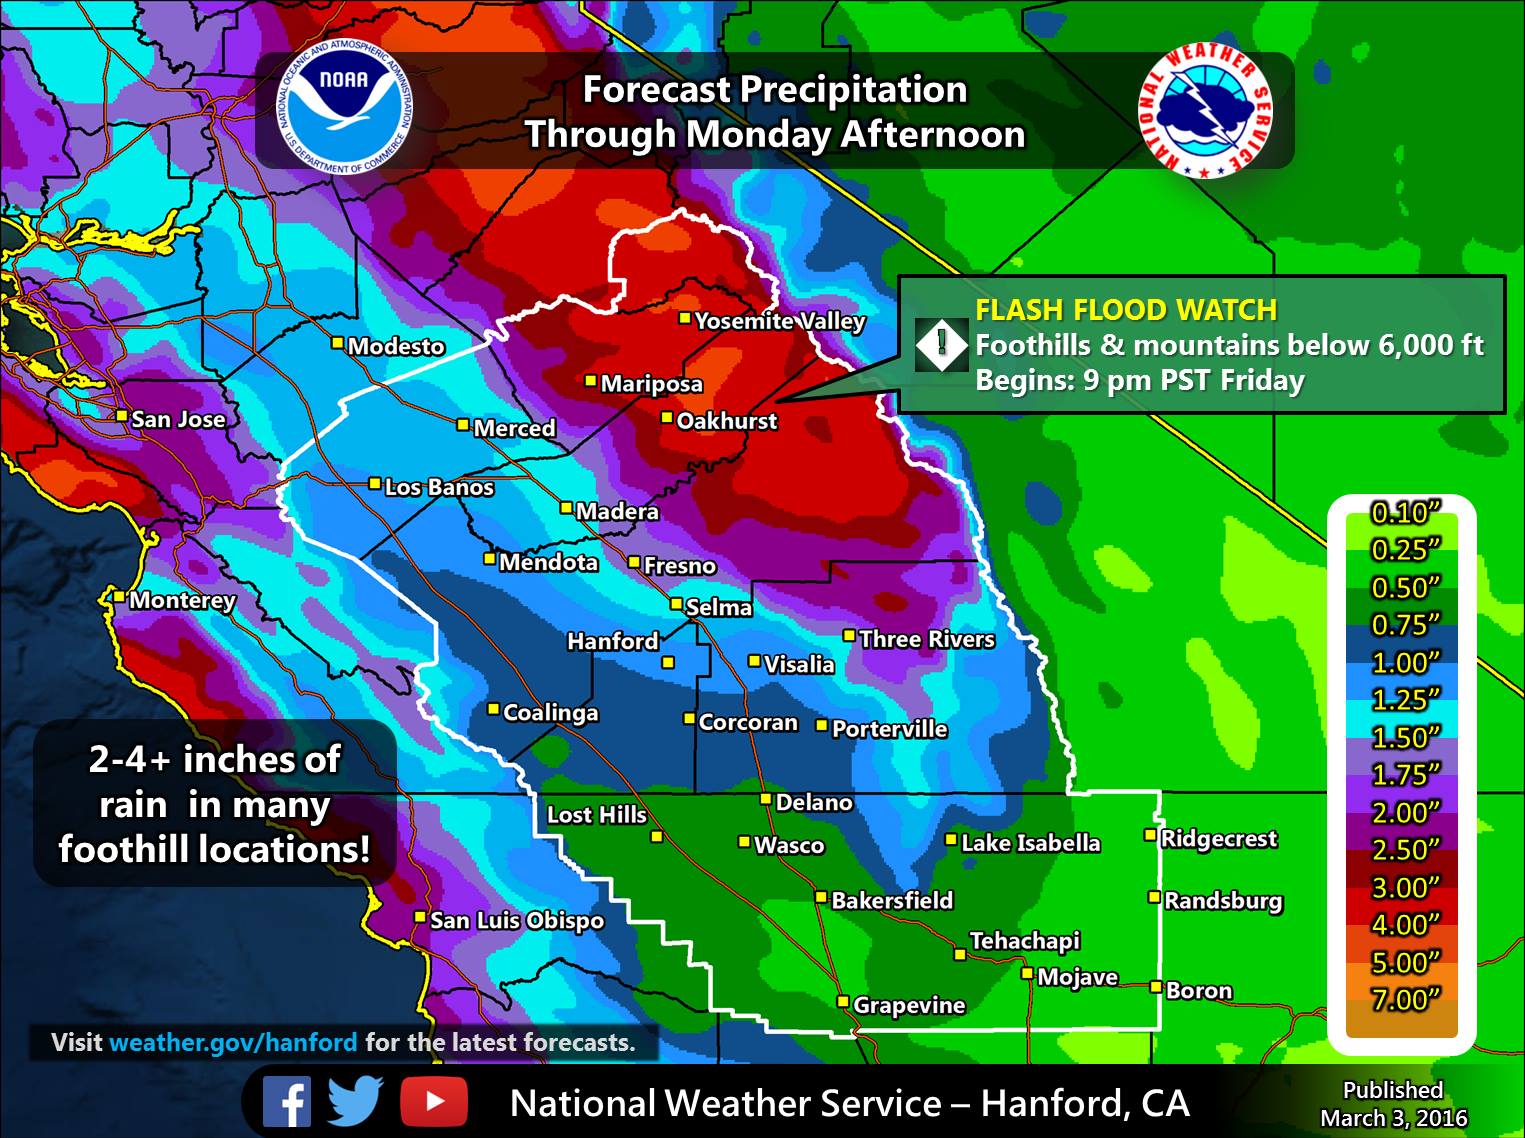 "Here is the latest precipitation forecast through Monday for Central California. Many foothill locations in Tulare, Fresno, Madera, and Mariposa Counties will receive 2-4 inches of rain or more. As a result, a flash flood watch goes into effect for these locations at 9 pm PST Friday. " - NOAA Hanford, CA today